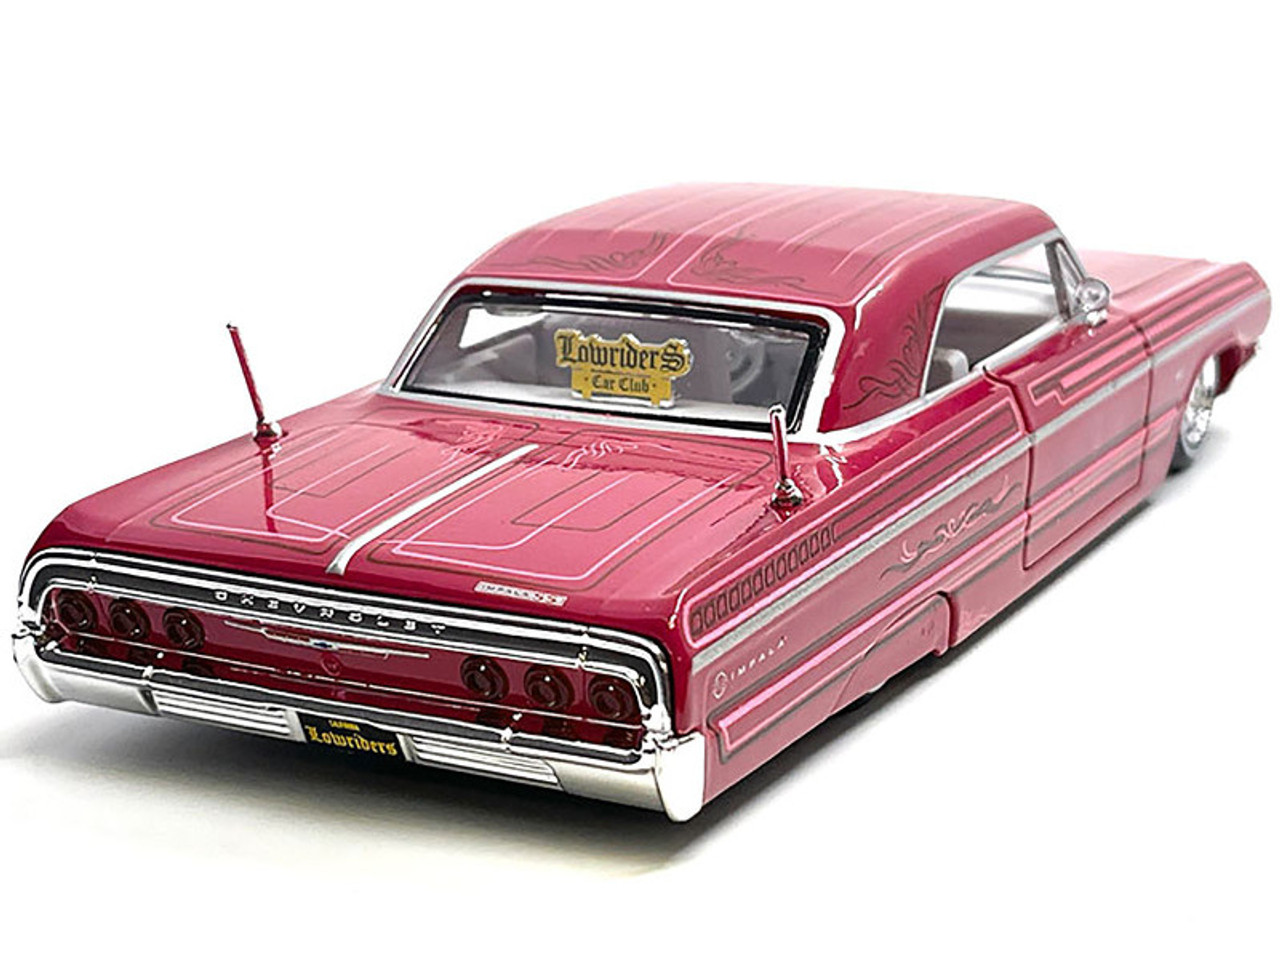 1964 Chevrolet Impala SS Lowrider Pink with Graphics and White Interior "Lowriders" "Maisto Design" Series 1/26 Diecast Model Car by Maisto